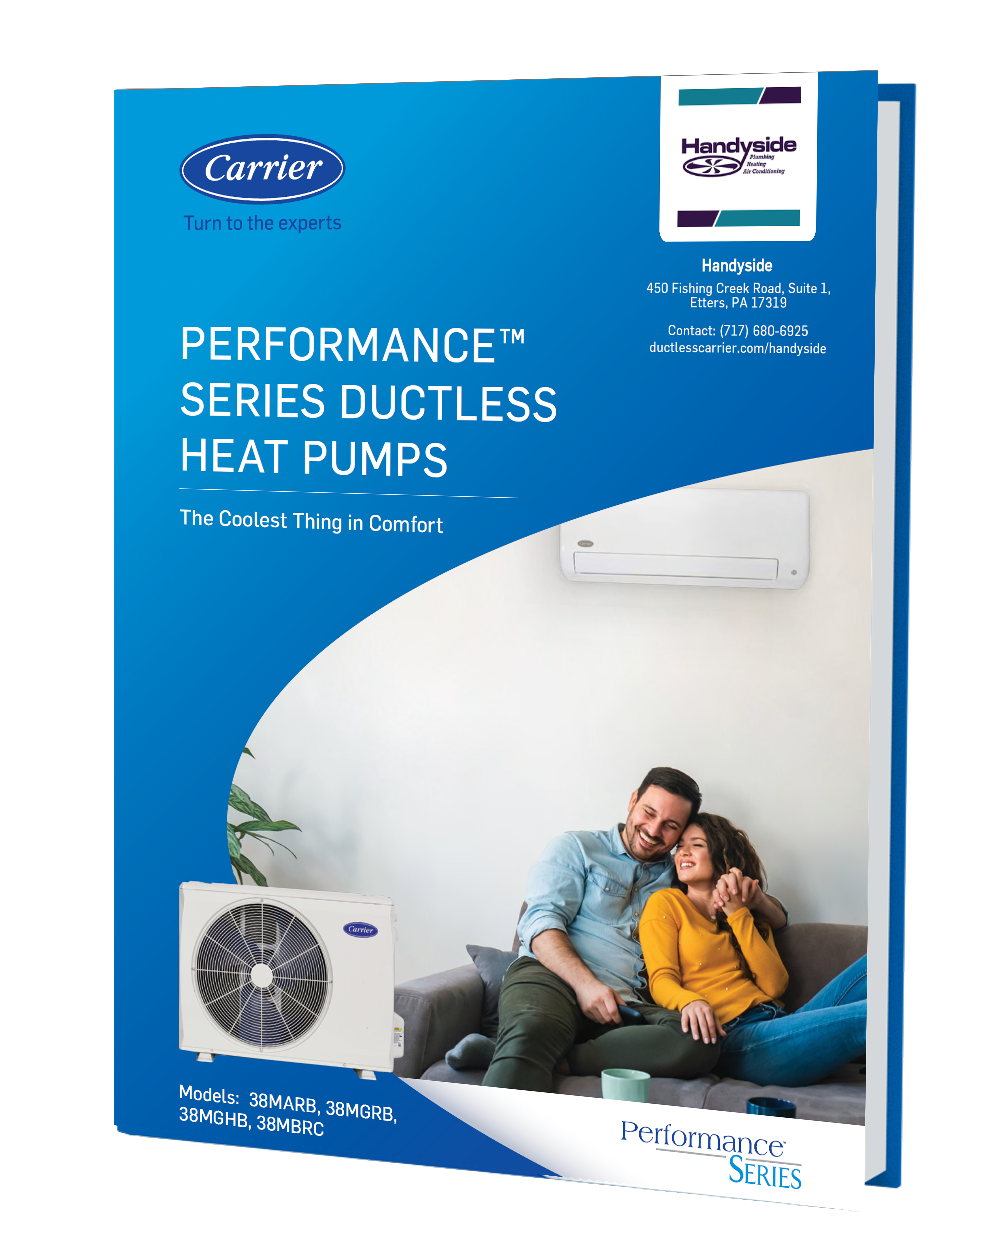 Handyside Carrier Ductless Product Guide